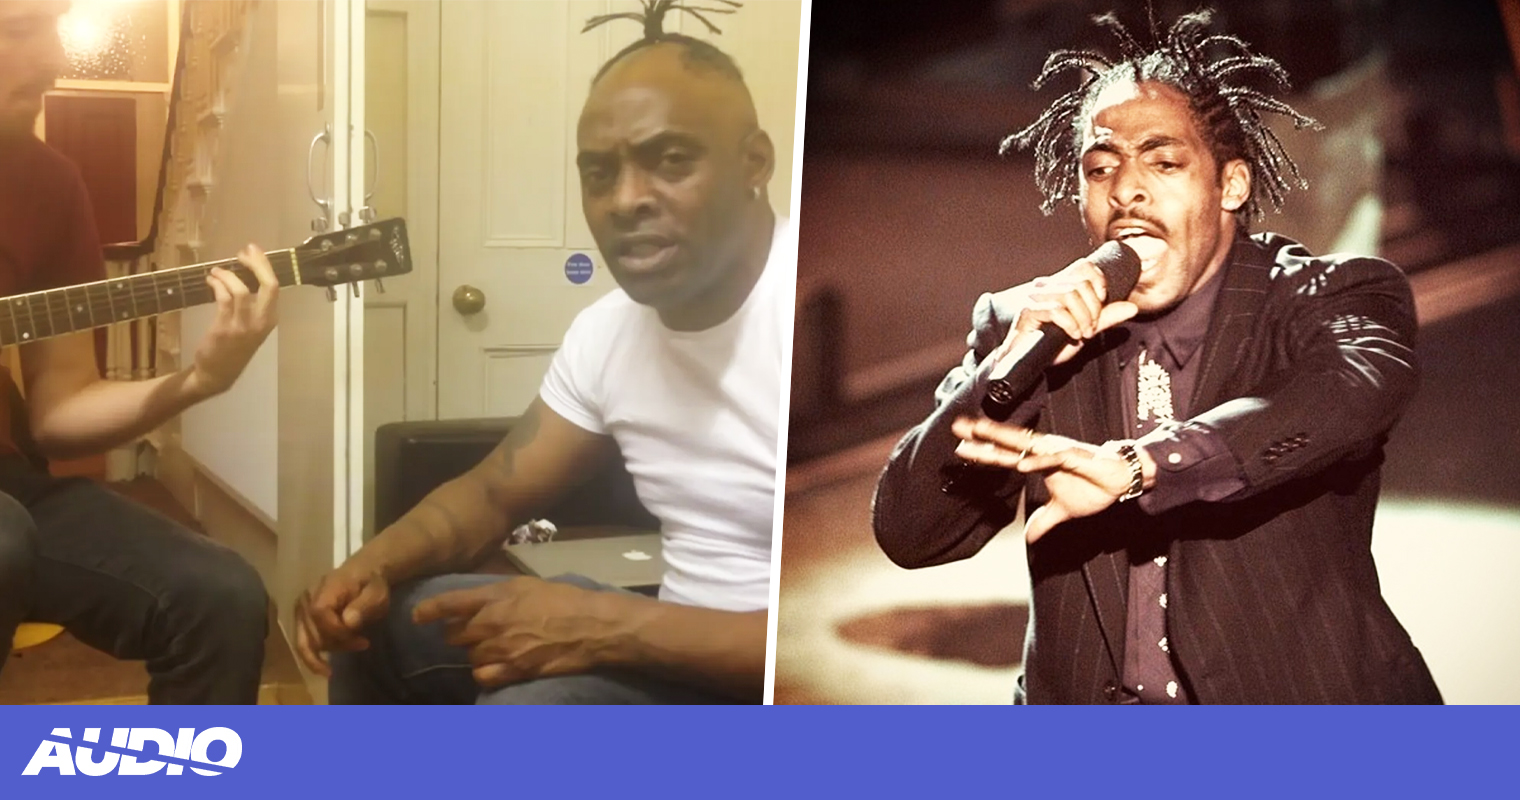 Remembering the time Coolio performed an acoustic set in a northern student house